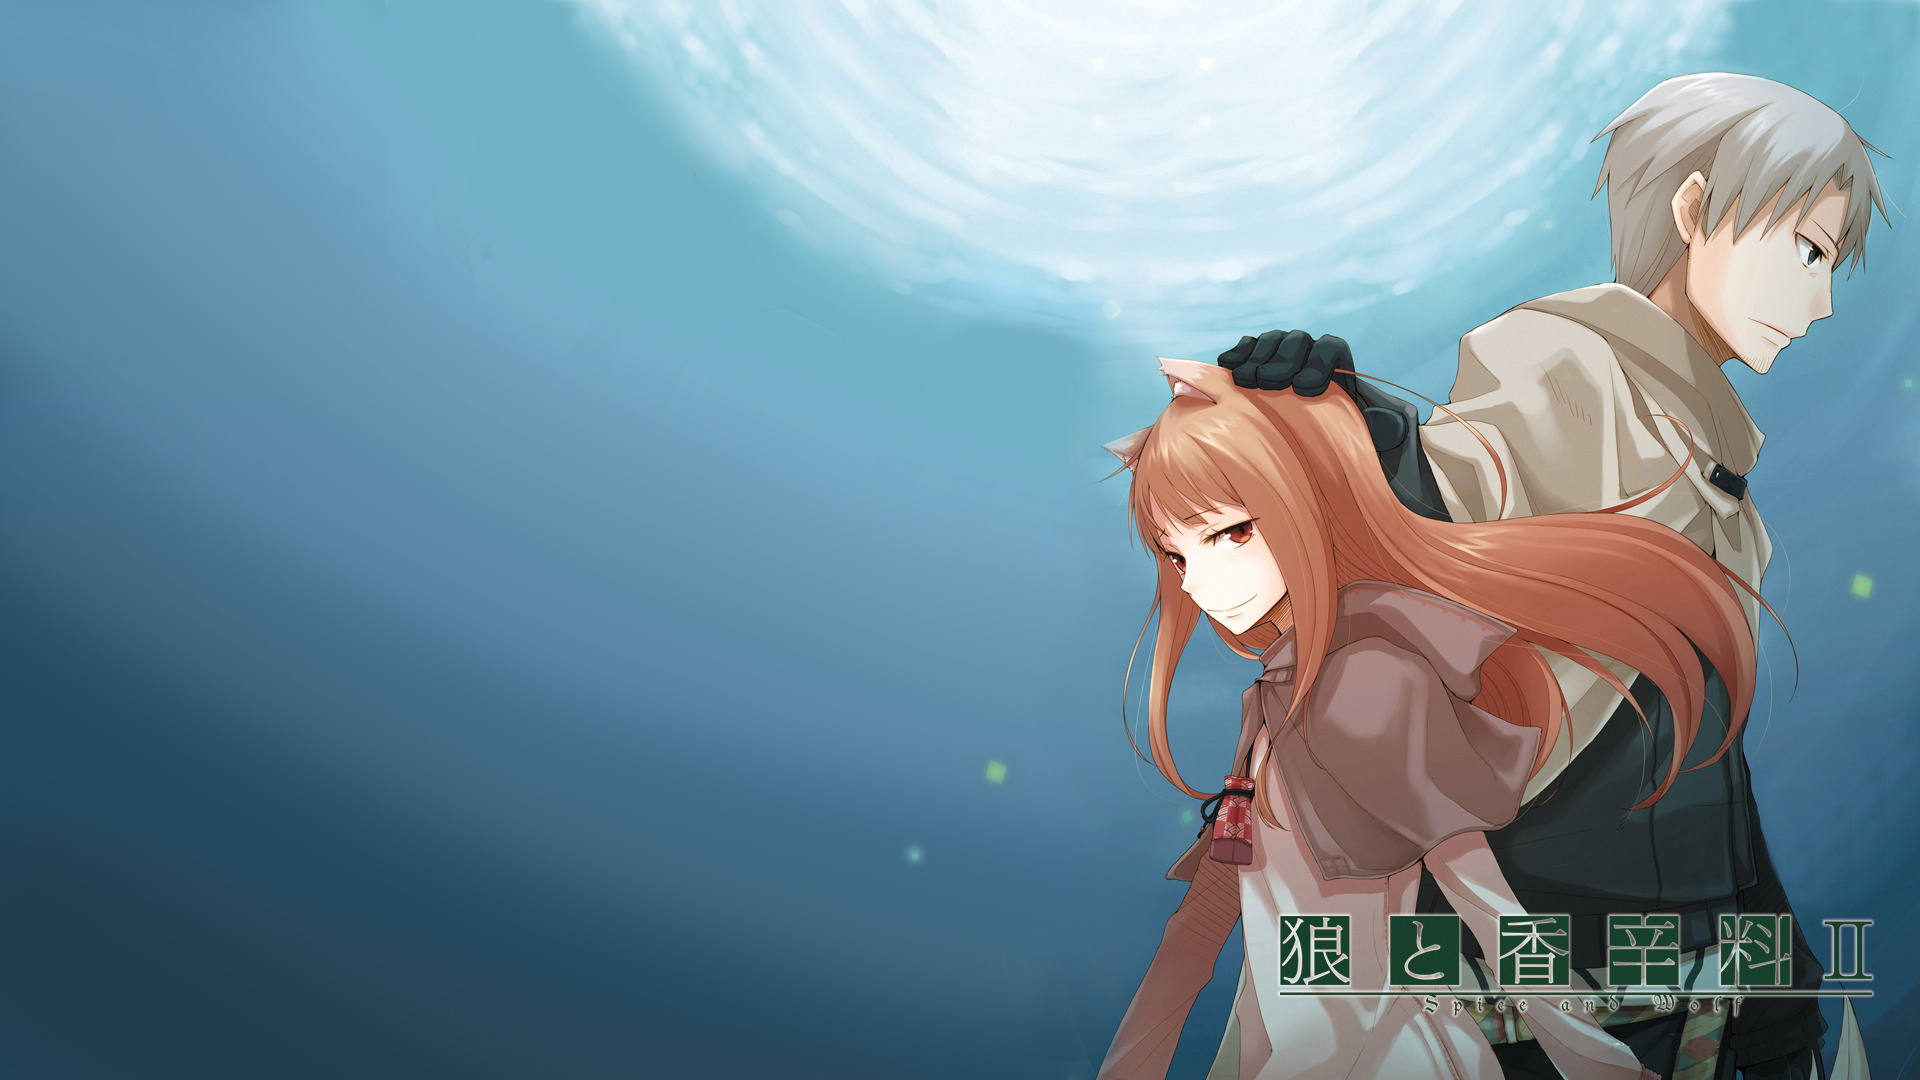 Spice And Wolf Background - HD Wallpaper 